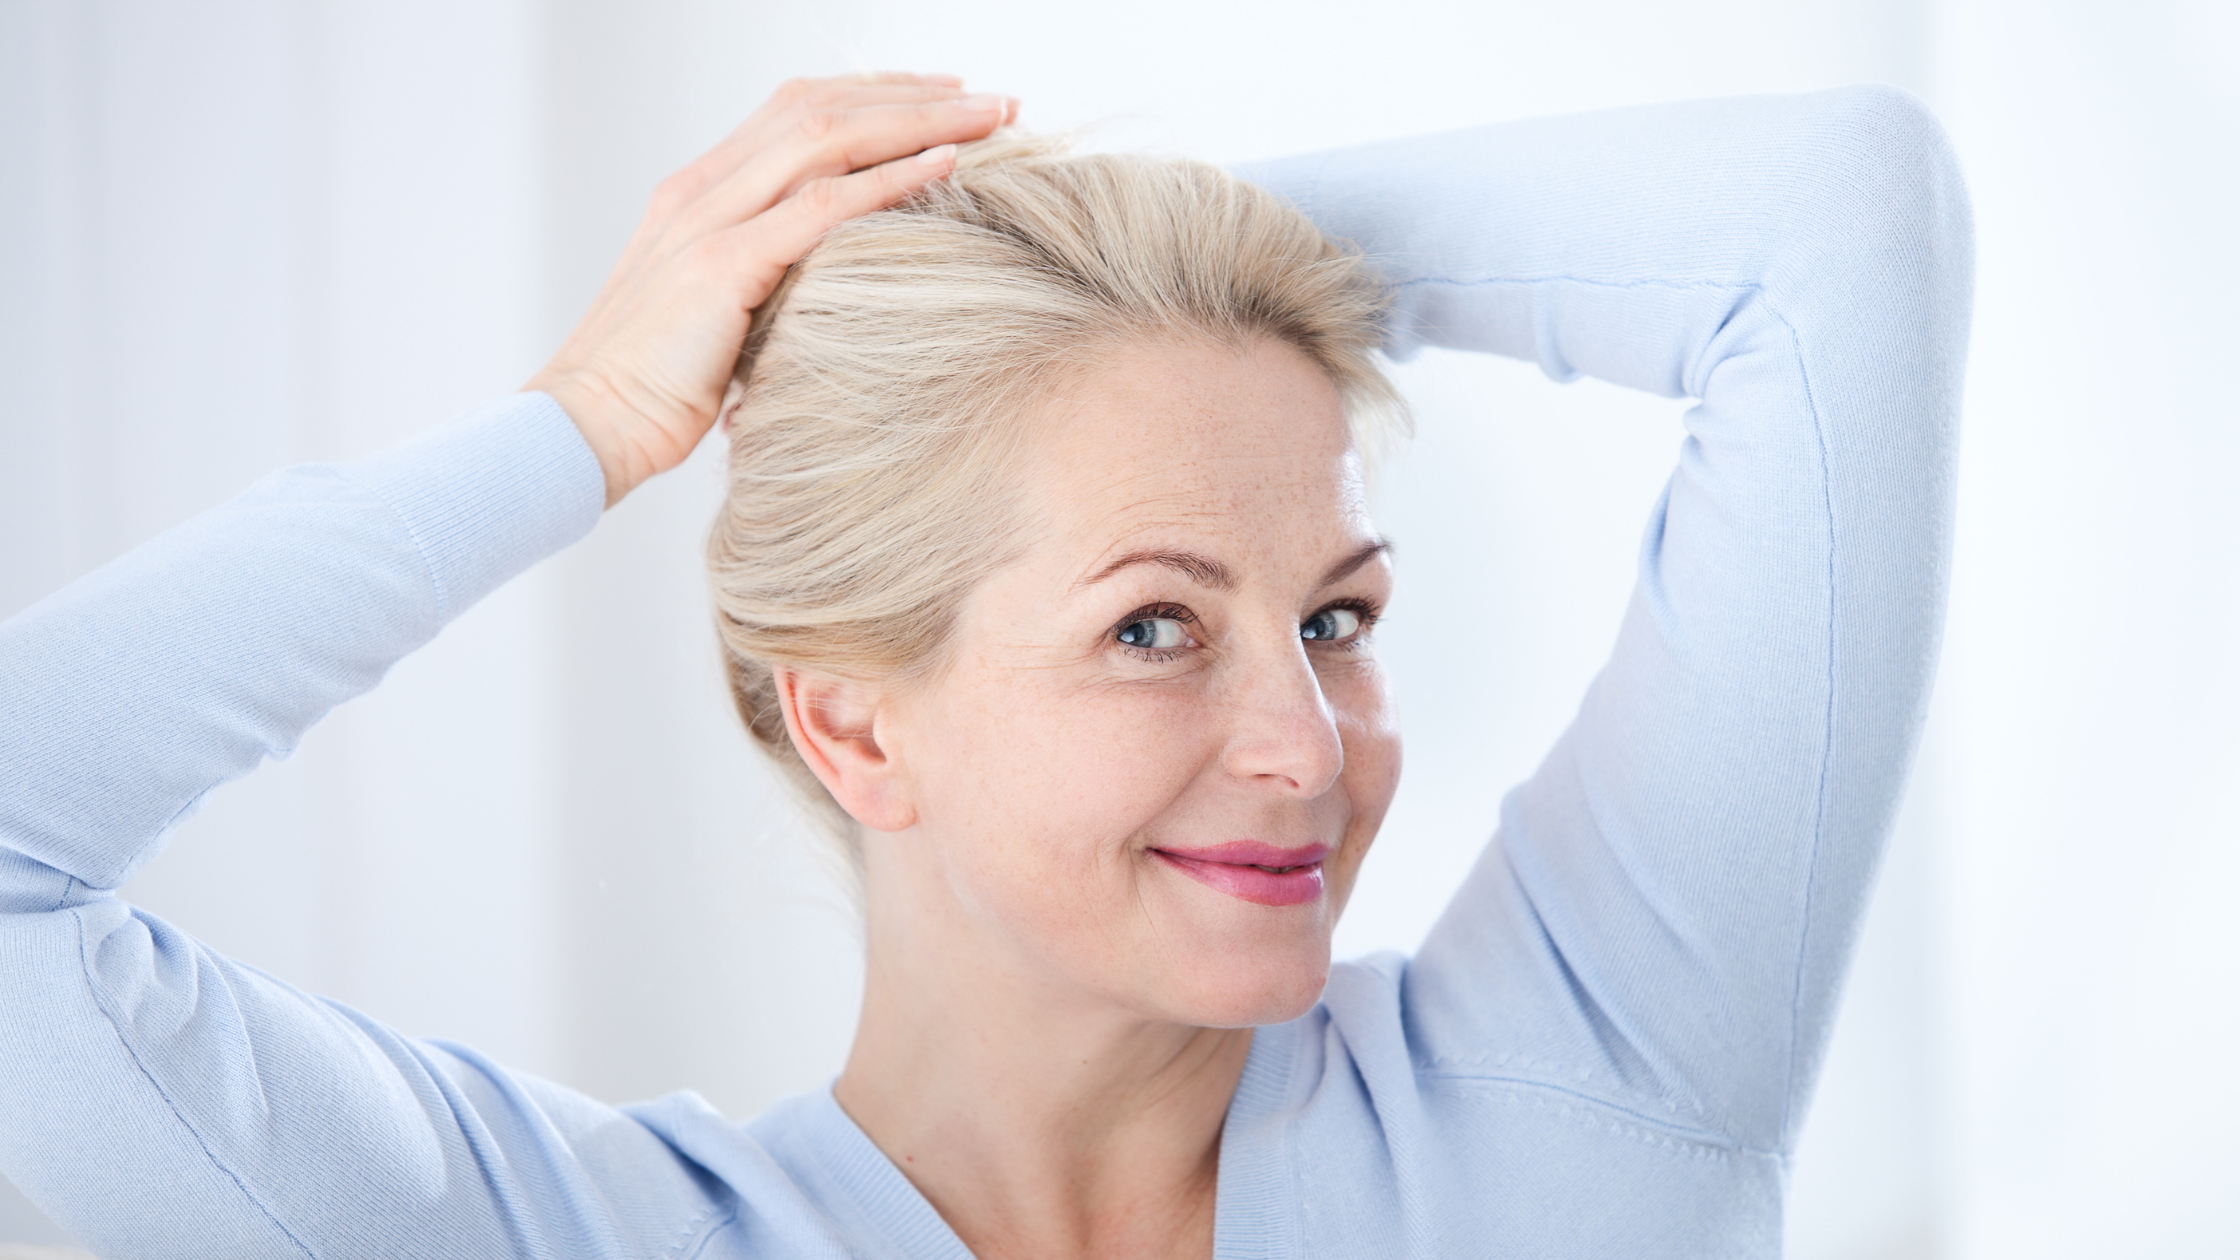 What You Need To Know About Taking Care Of Hair During Every Stage Of Menopause